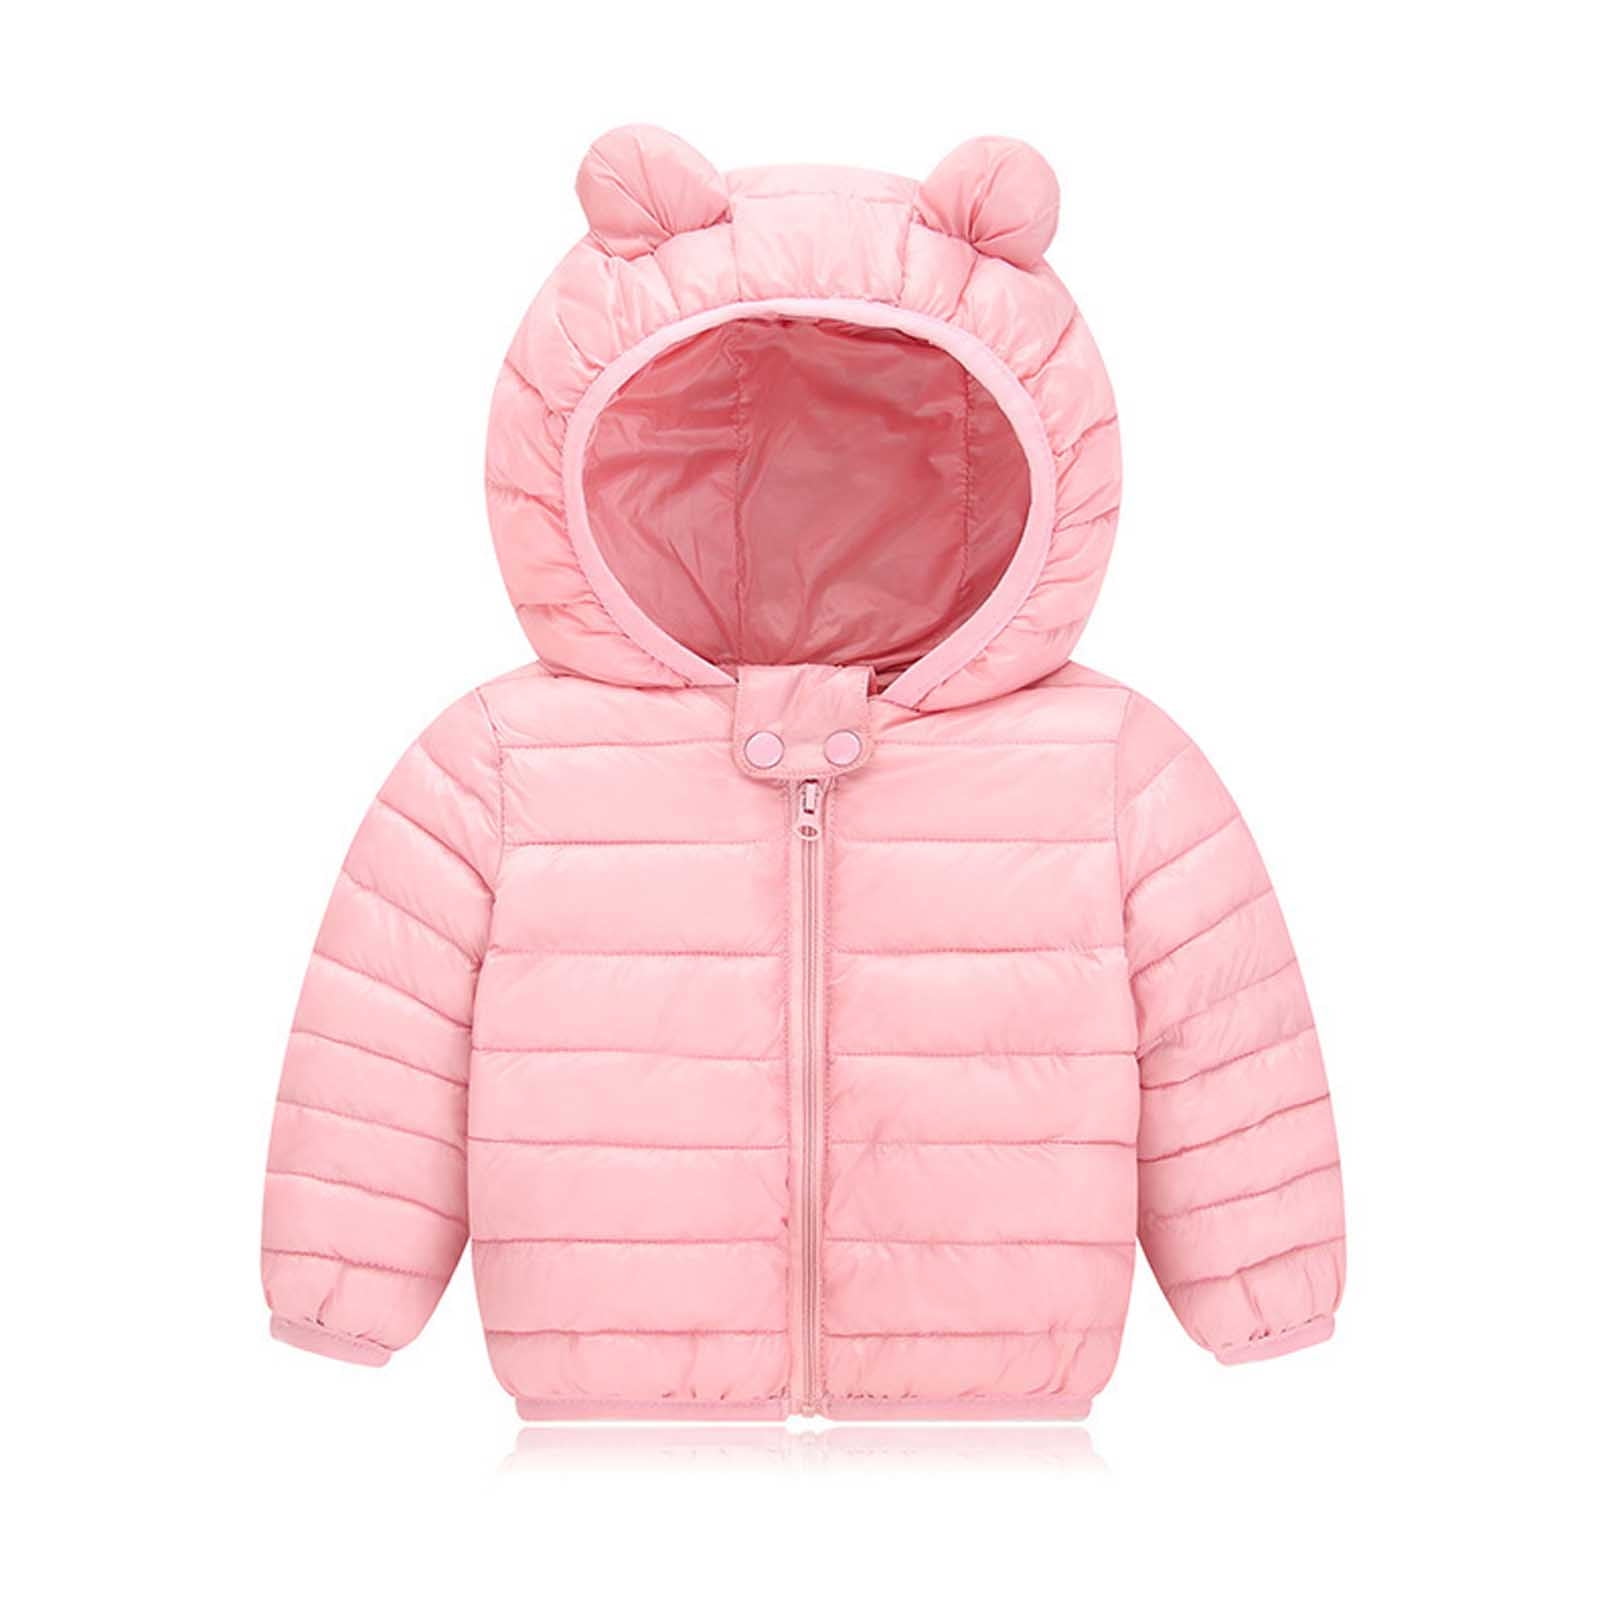 Winter Children's Baby Boy and Girl Clothes Thick Warm Down jackets 